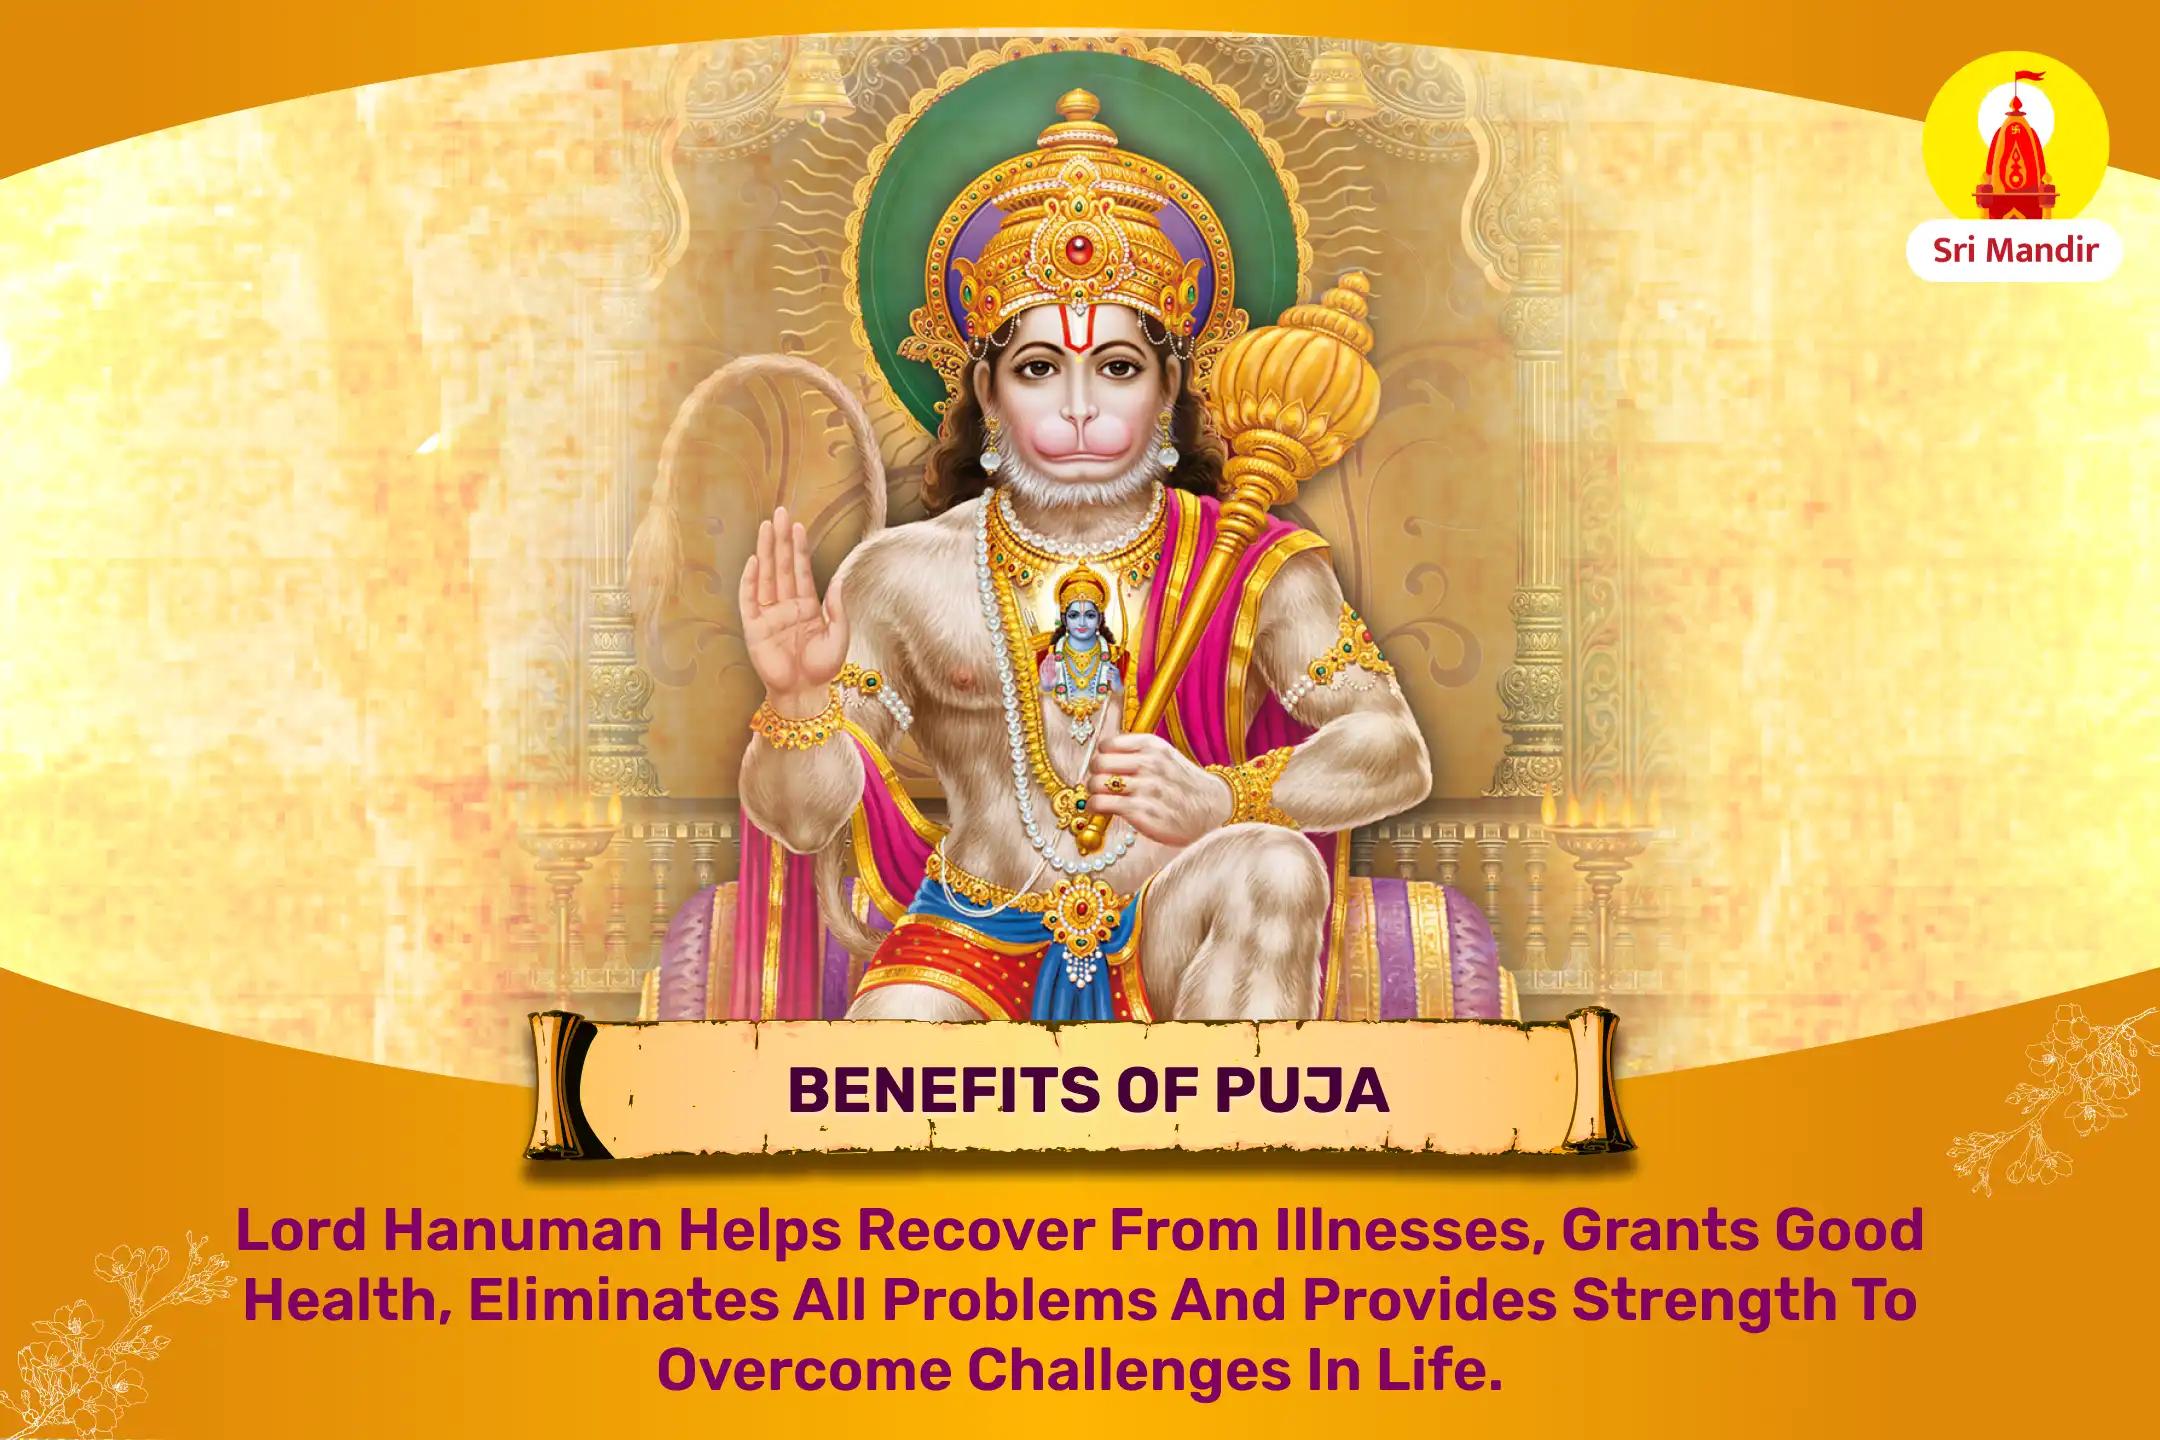 Ram Janmabhoomi Special 1008 Hanuman Mantra Jaap and Sunderkand Path for Good Health and Strength to Overcome Challenges